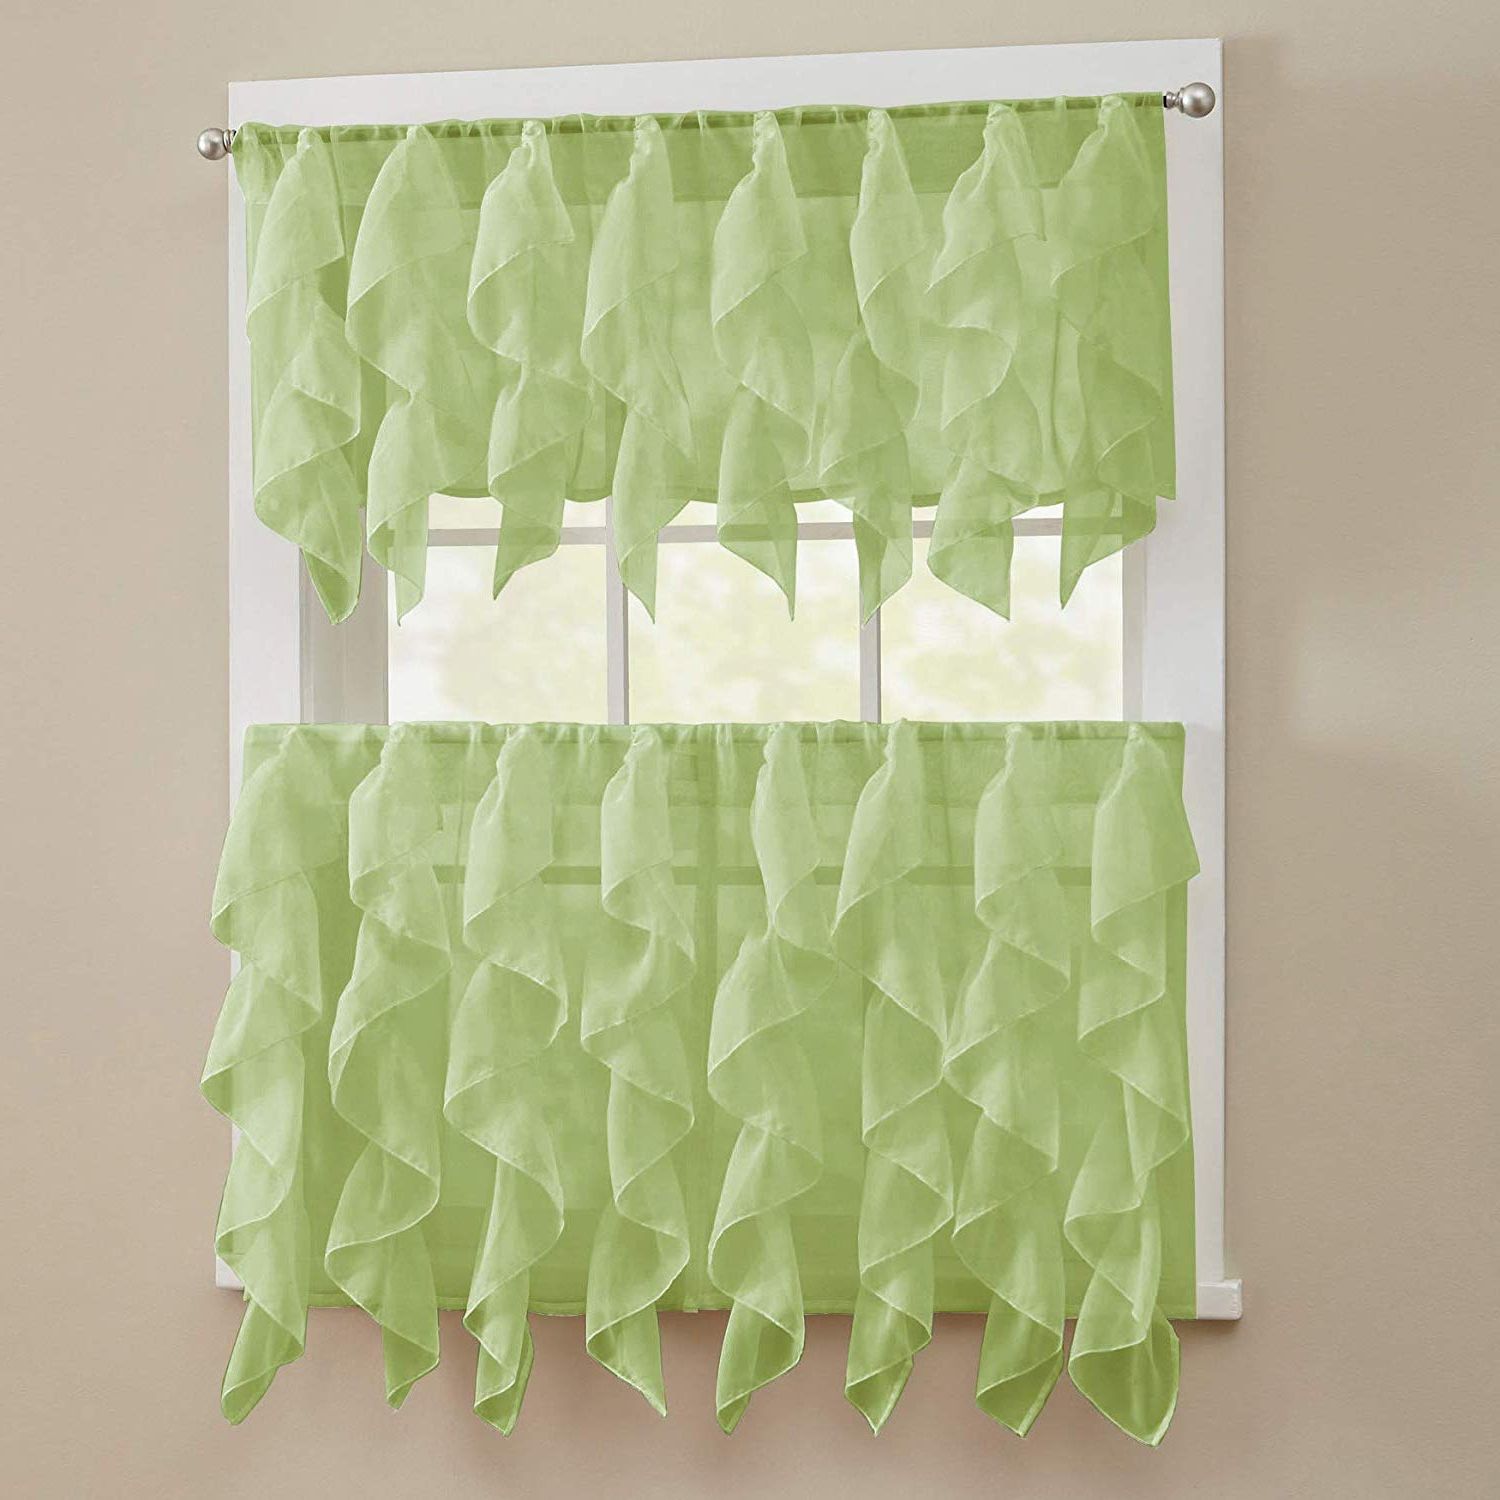 Current Navy Vertical Ruffled Waterfall Valance And Curtain Tiers For Sweet Home Collection 3 Piece Kitchen Curtain Set Sheet Vertical Cascading  Waterfall Ruffle Includes Valance & Choice Of 24" Or 36" Teir Pair, Tier, (View 8 of 20)